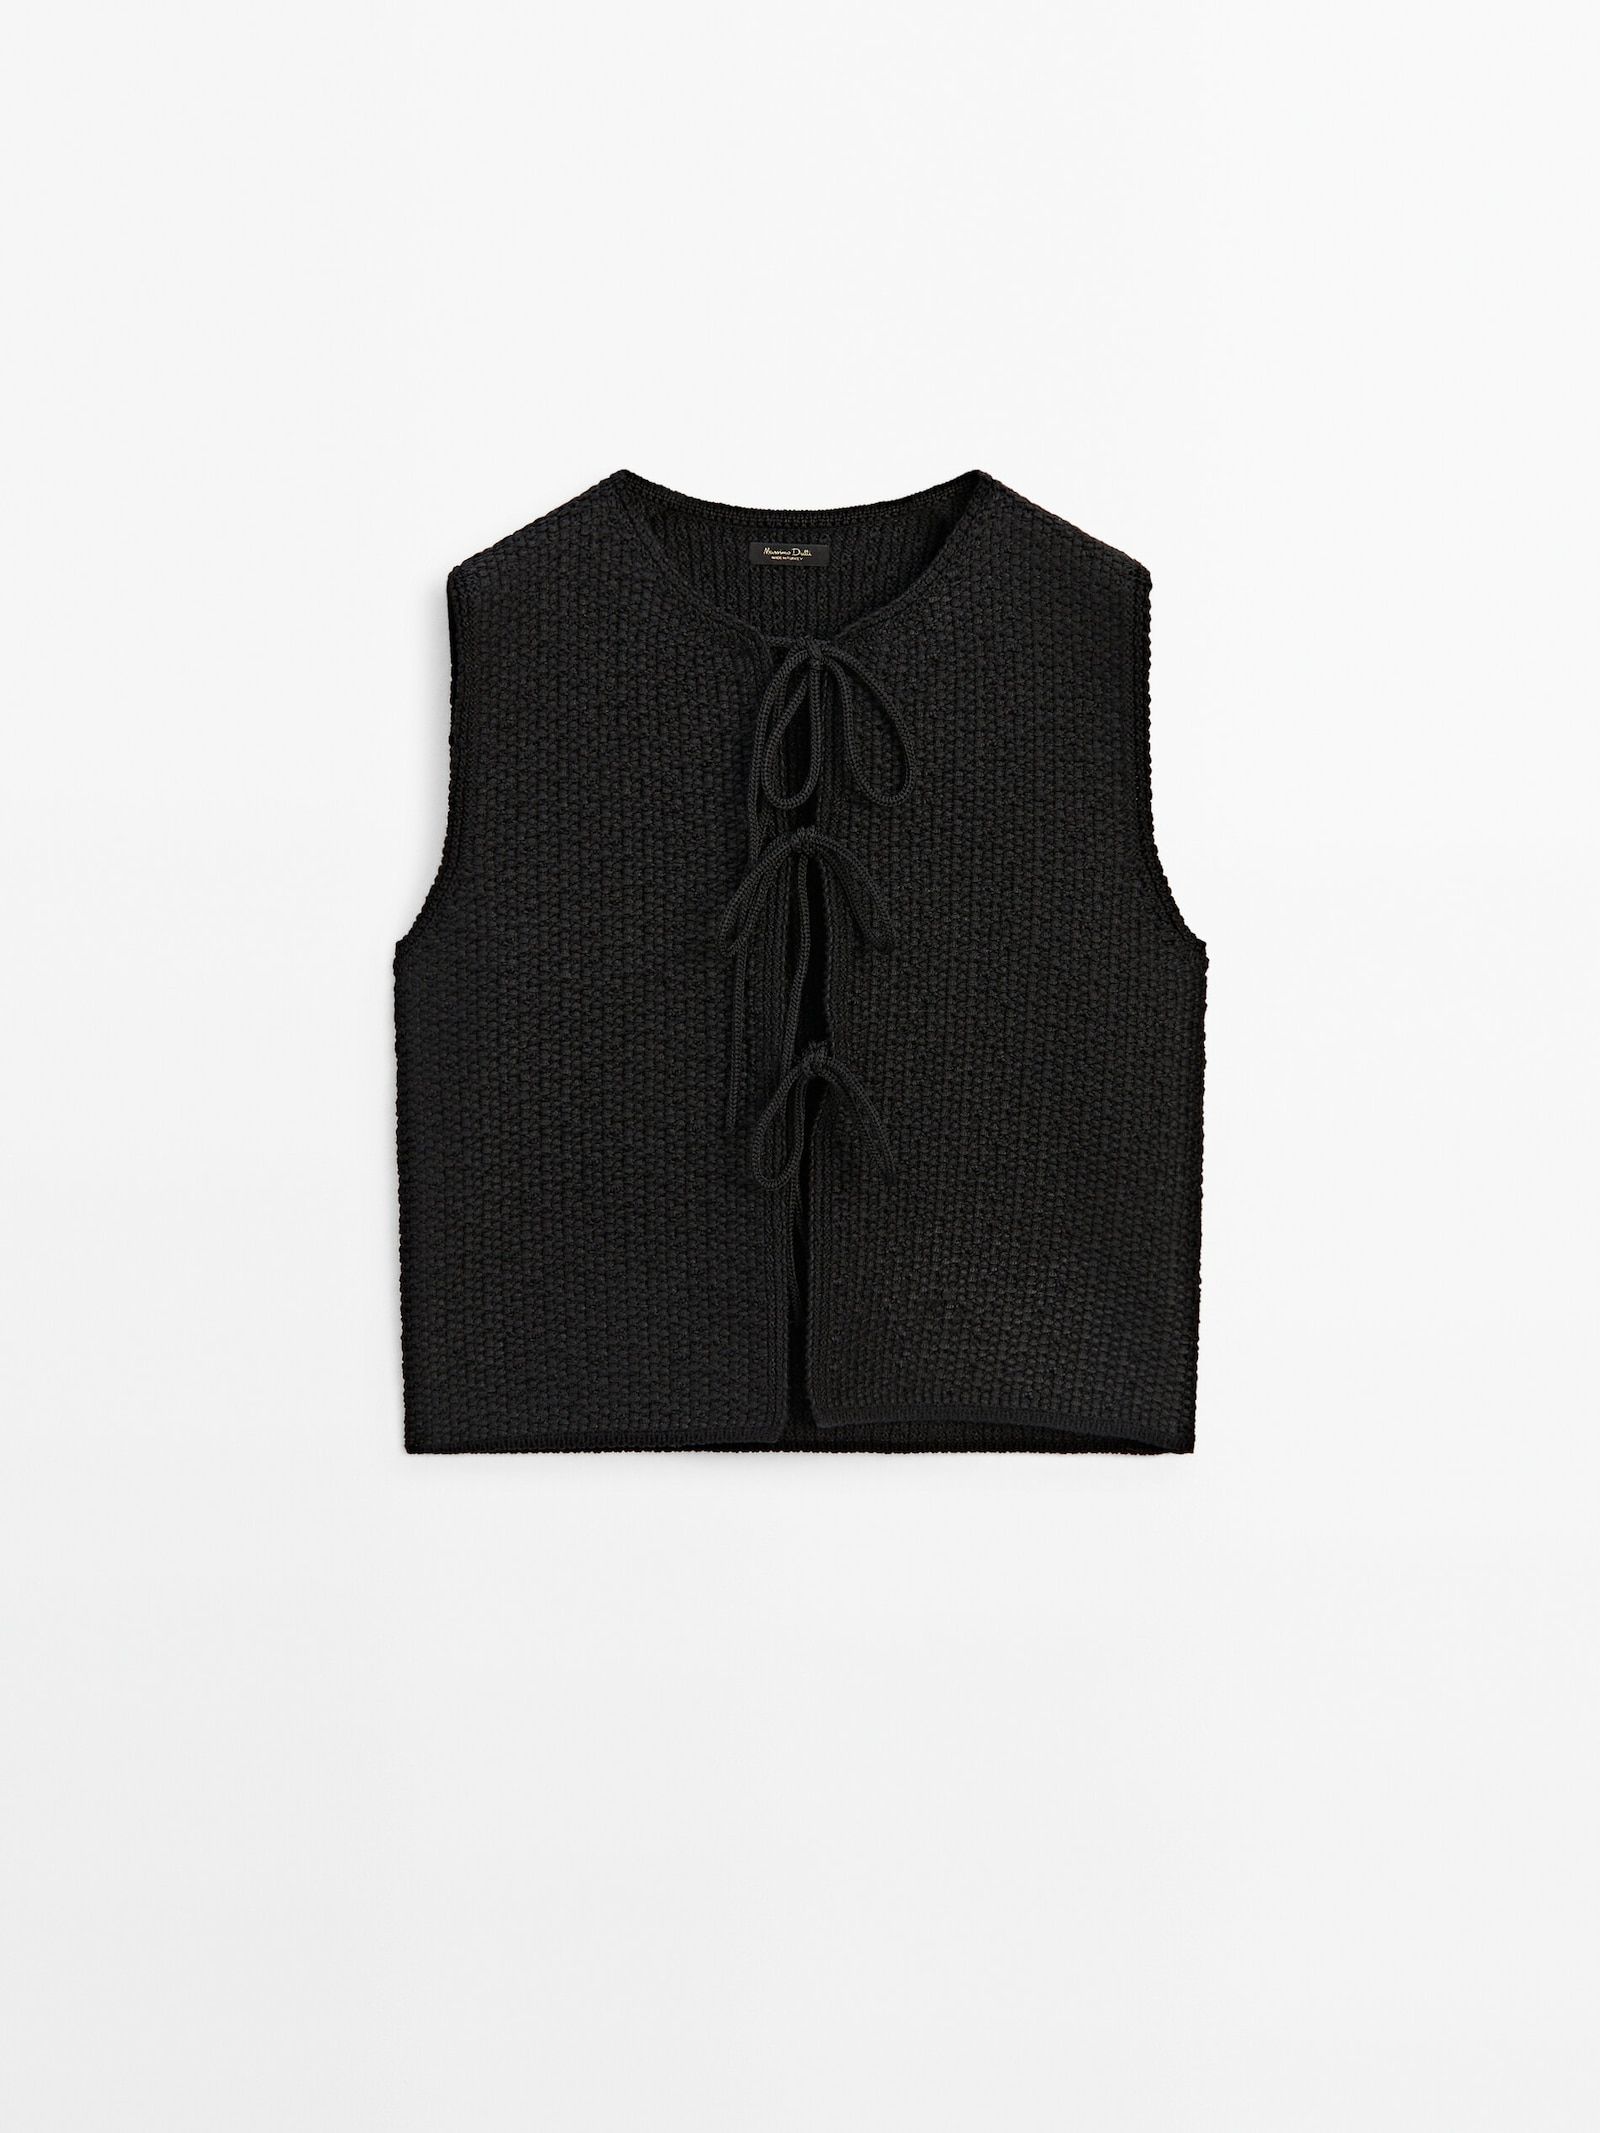 Knit vest with a crew neck and tie details | Massimo Dutti (US)